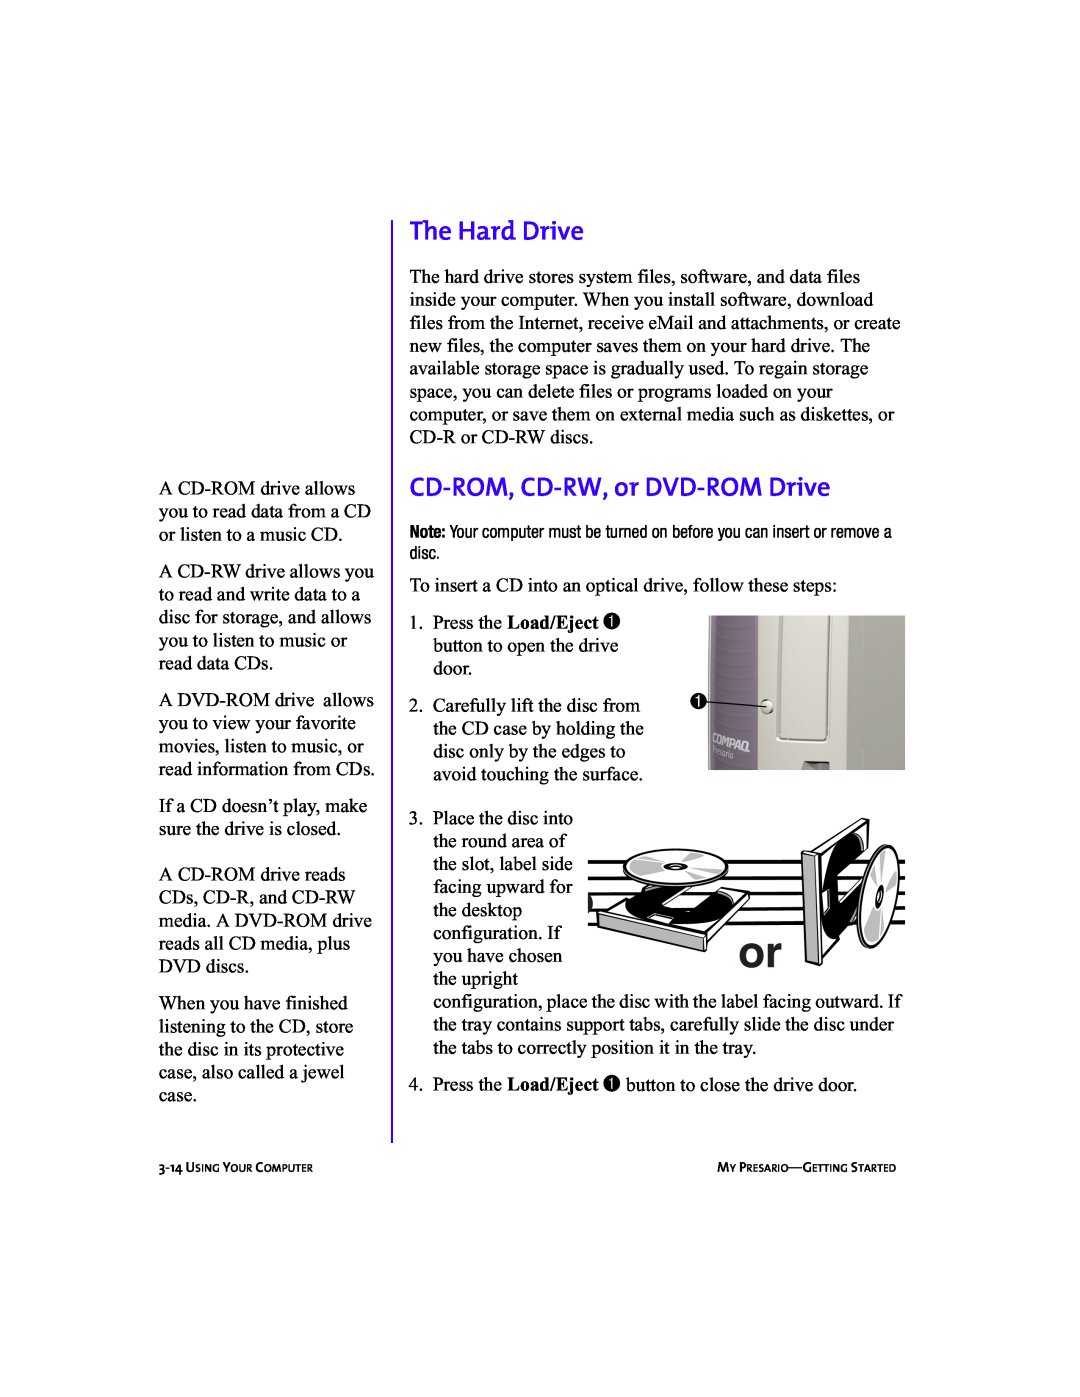 Compaq 5BW474 manual The Hard Drive, CD-ROM, CD-RW, or DVD-ROM Drive, Press the Load/Eject 1 button to open the drive door 